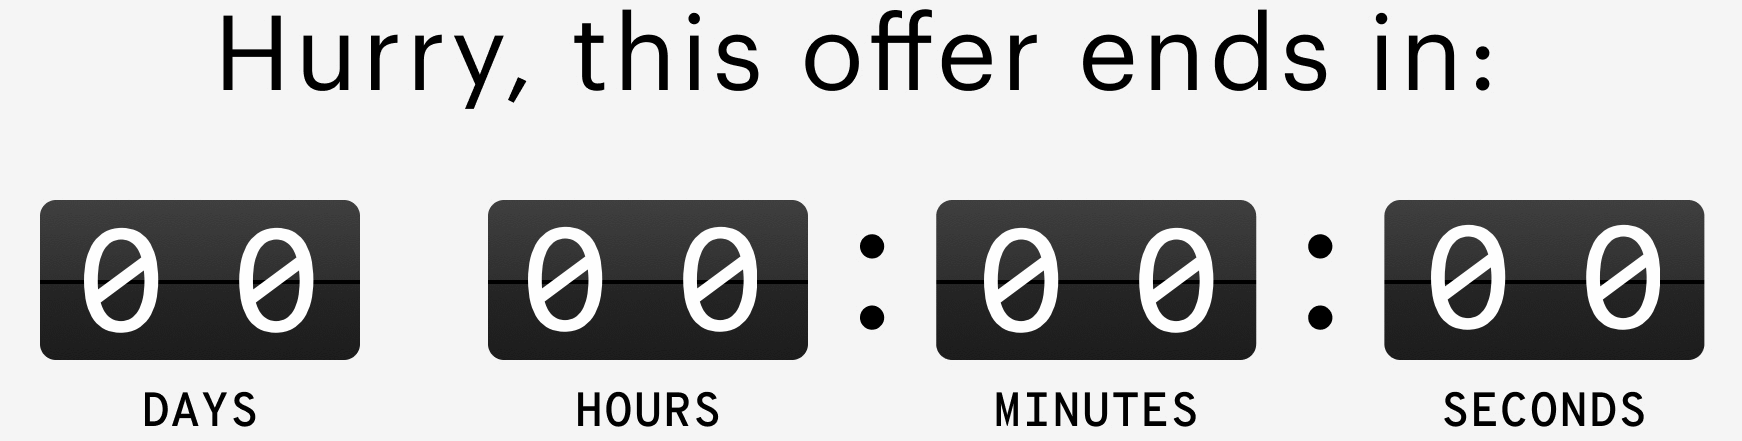 Hurry, this offer ends in: | DAYS | HOURS | MINUTES | SECONDS